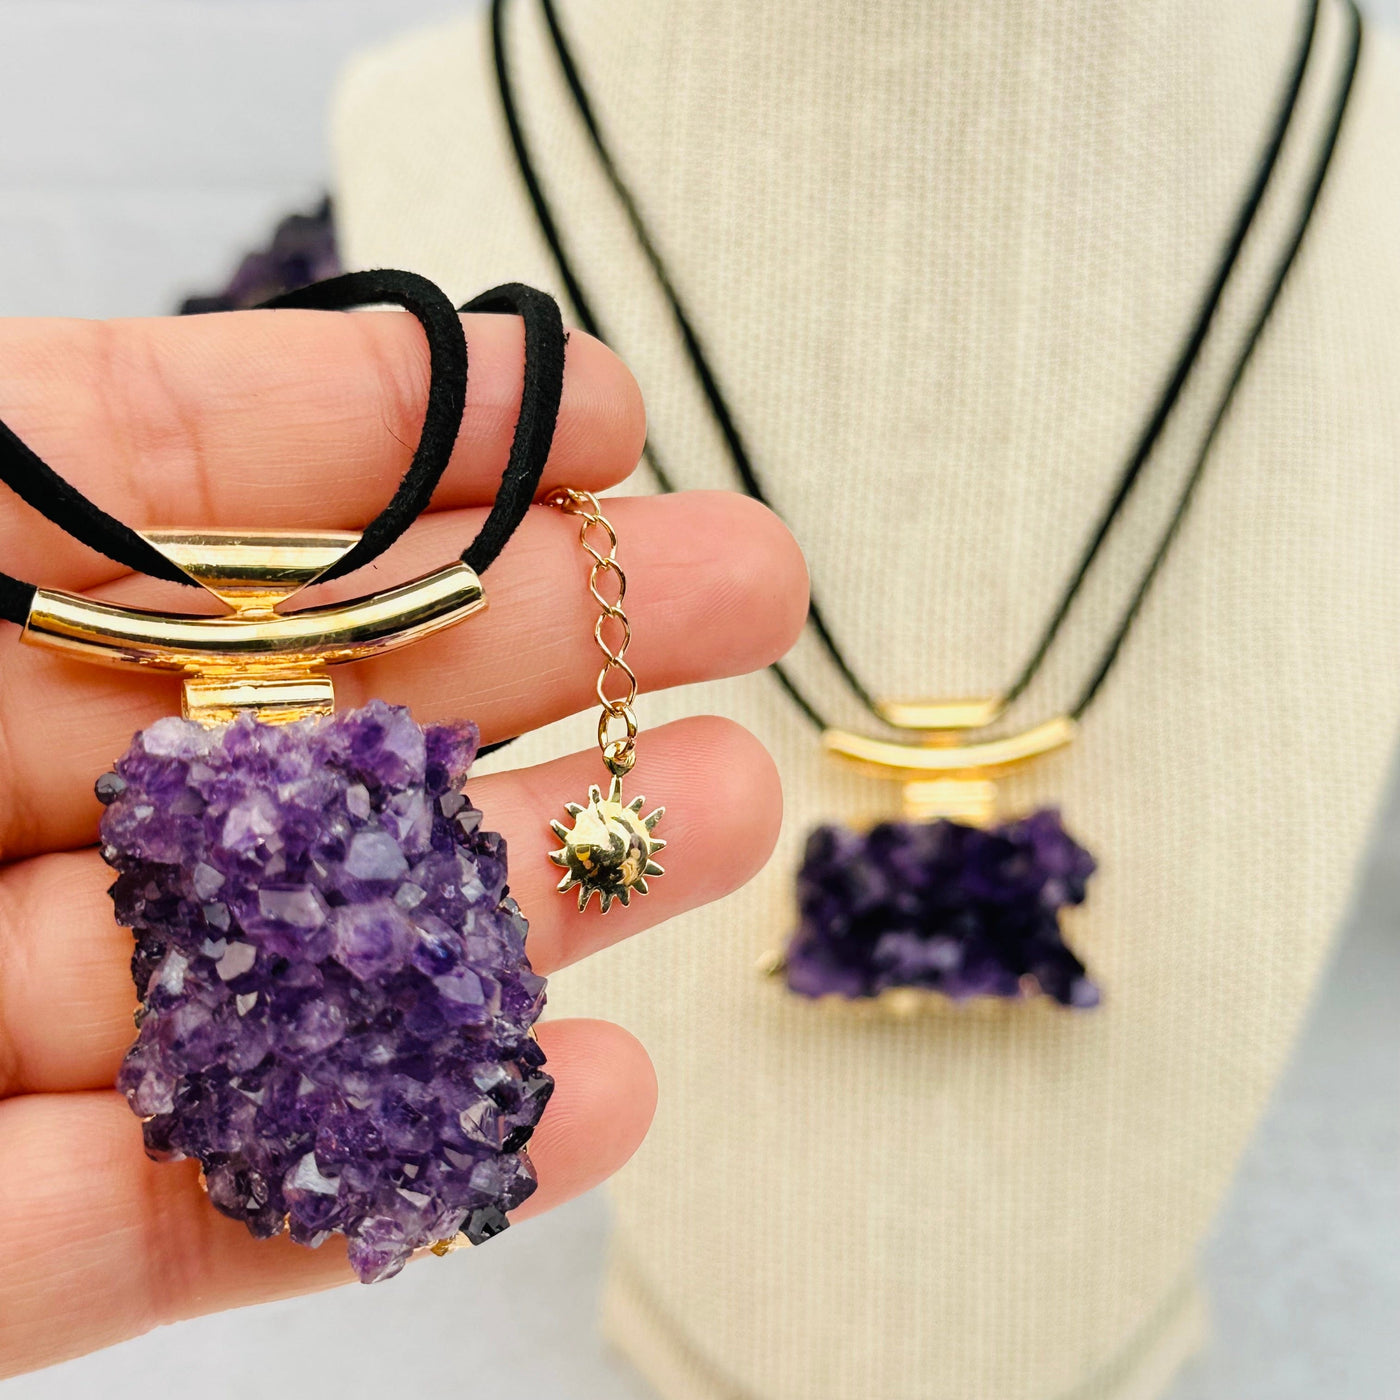 Amethyst Crystal Cluster Necklace with Charm - 24k Gold Electroplated - in hand for size reference 